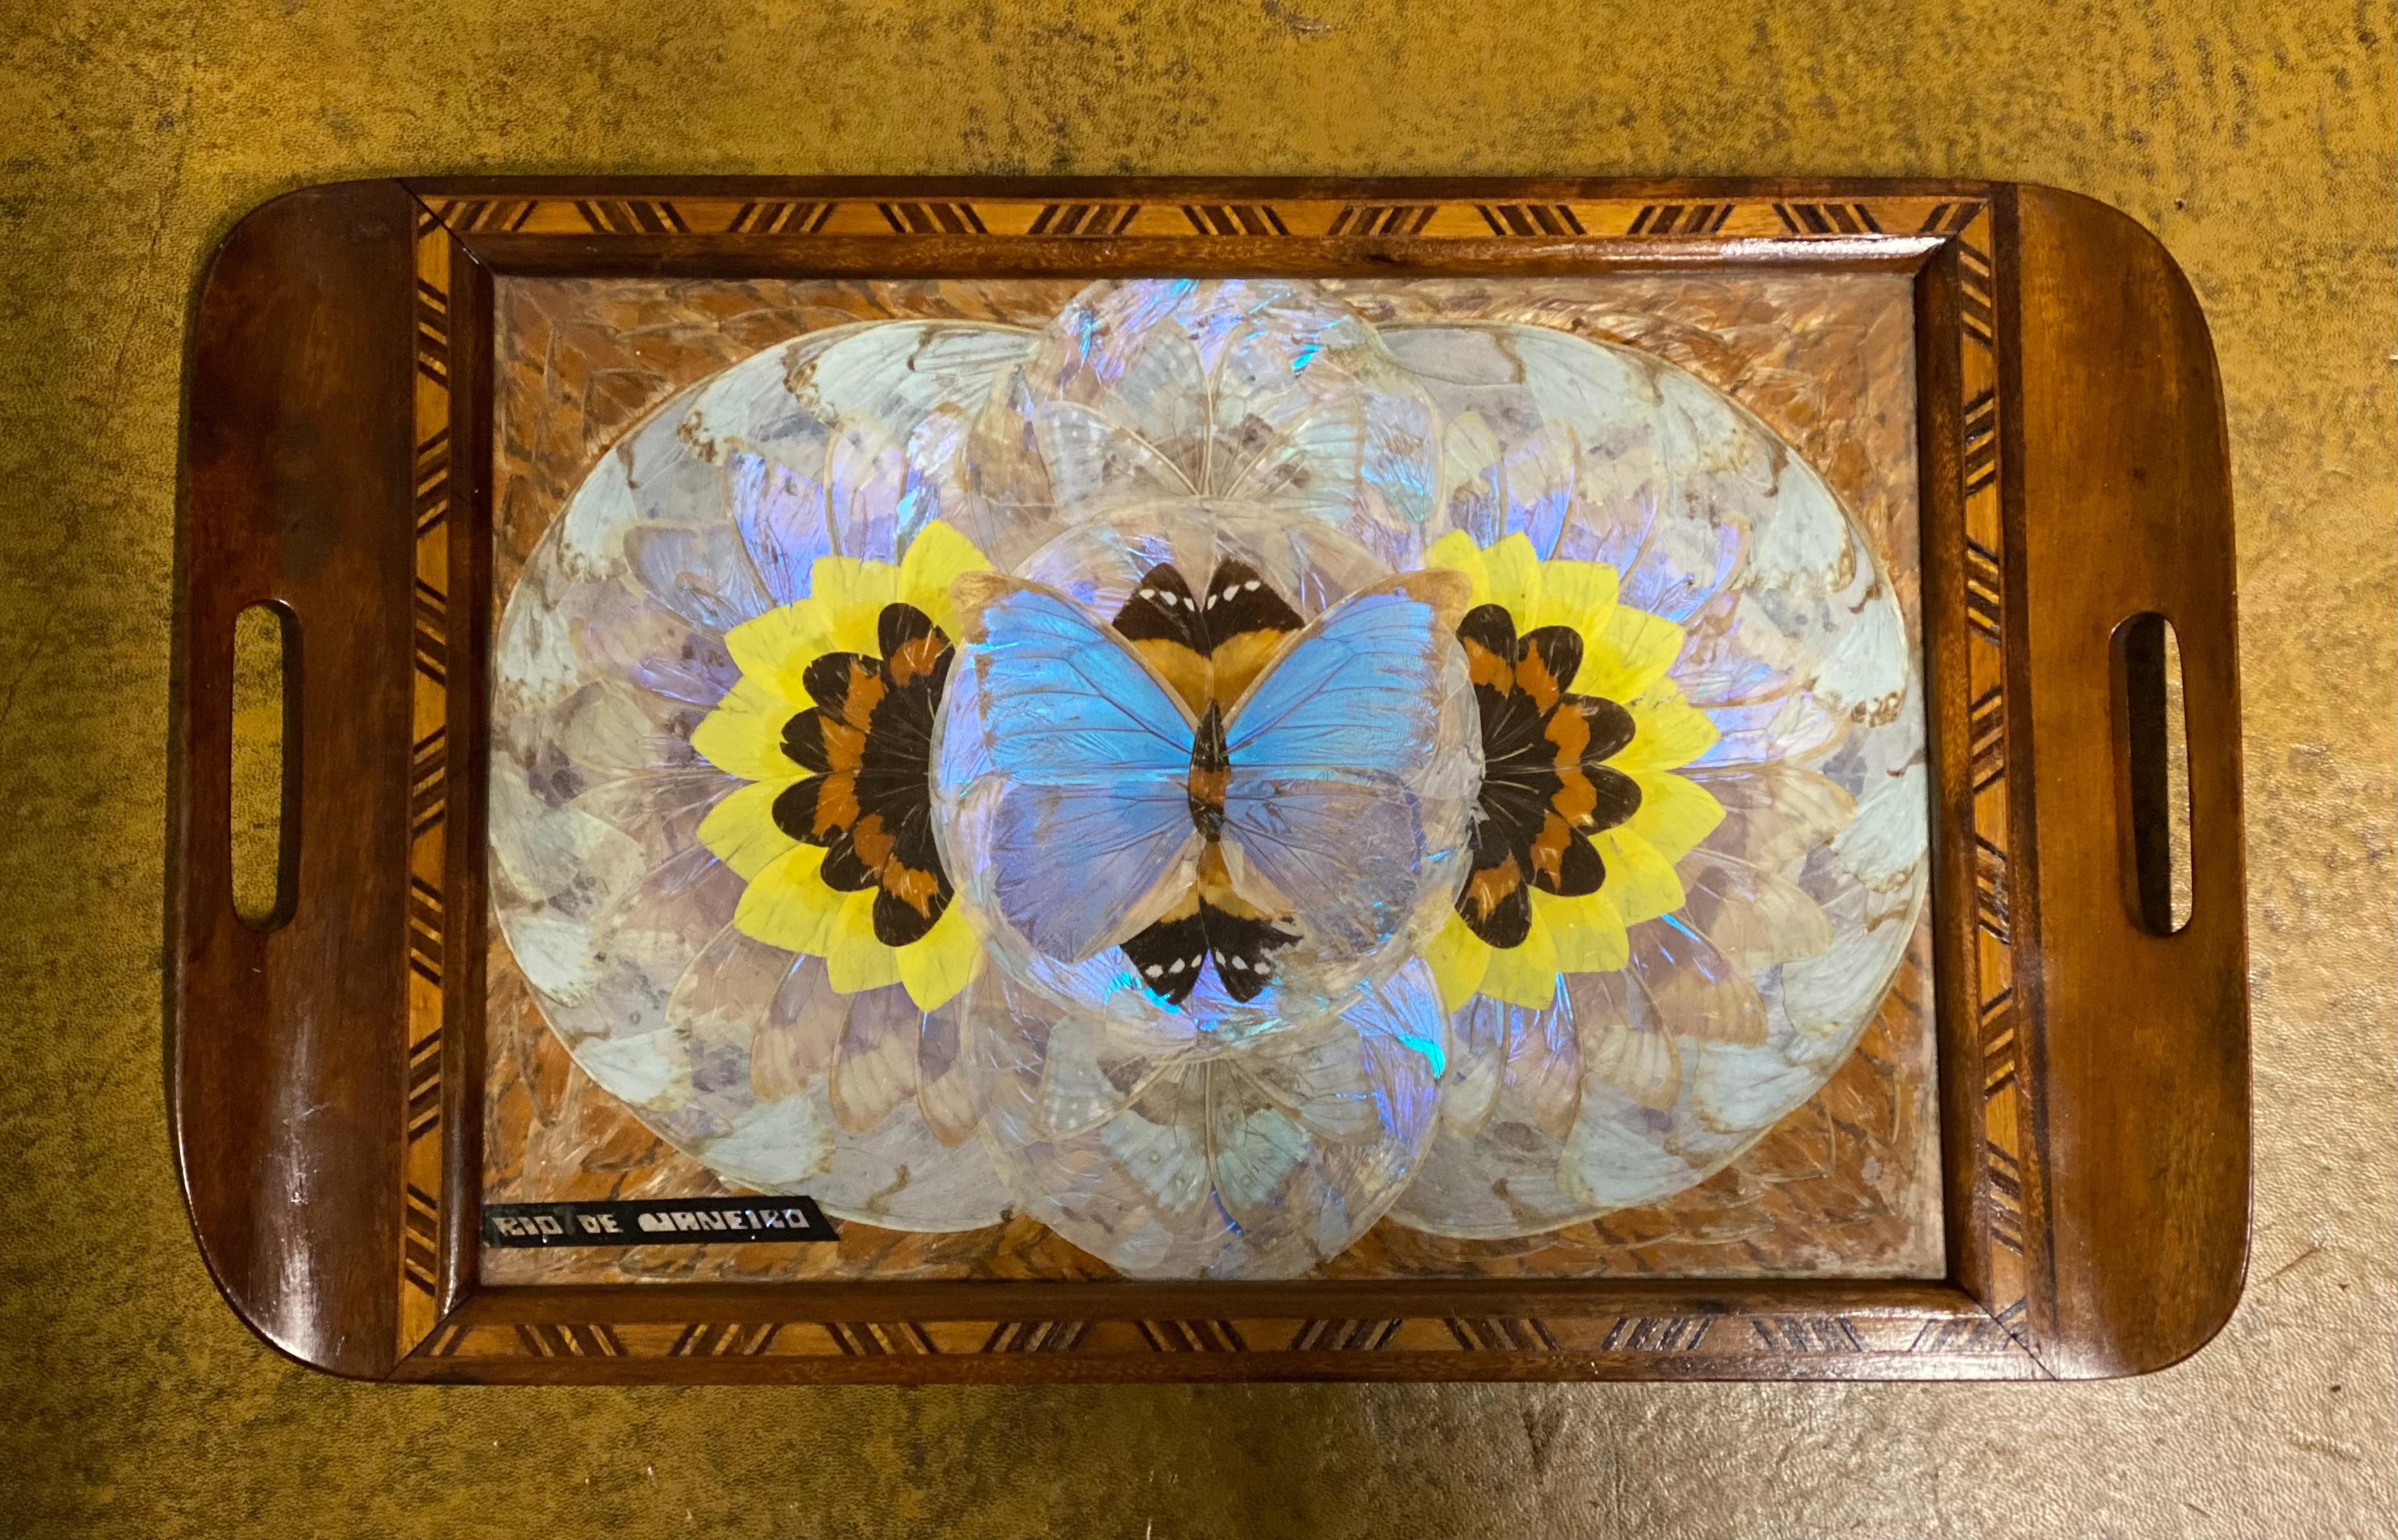 
We are excited to present this vintage Brazilian inlaid wood tray with real Morpho butterfly wings.

This vintage tray features a geometric pattern made from the wings of the brilliant iridescent Blue Morpho butterfly.
Move the tray slightly and